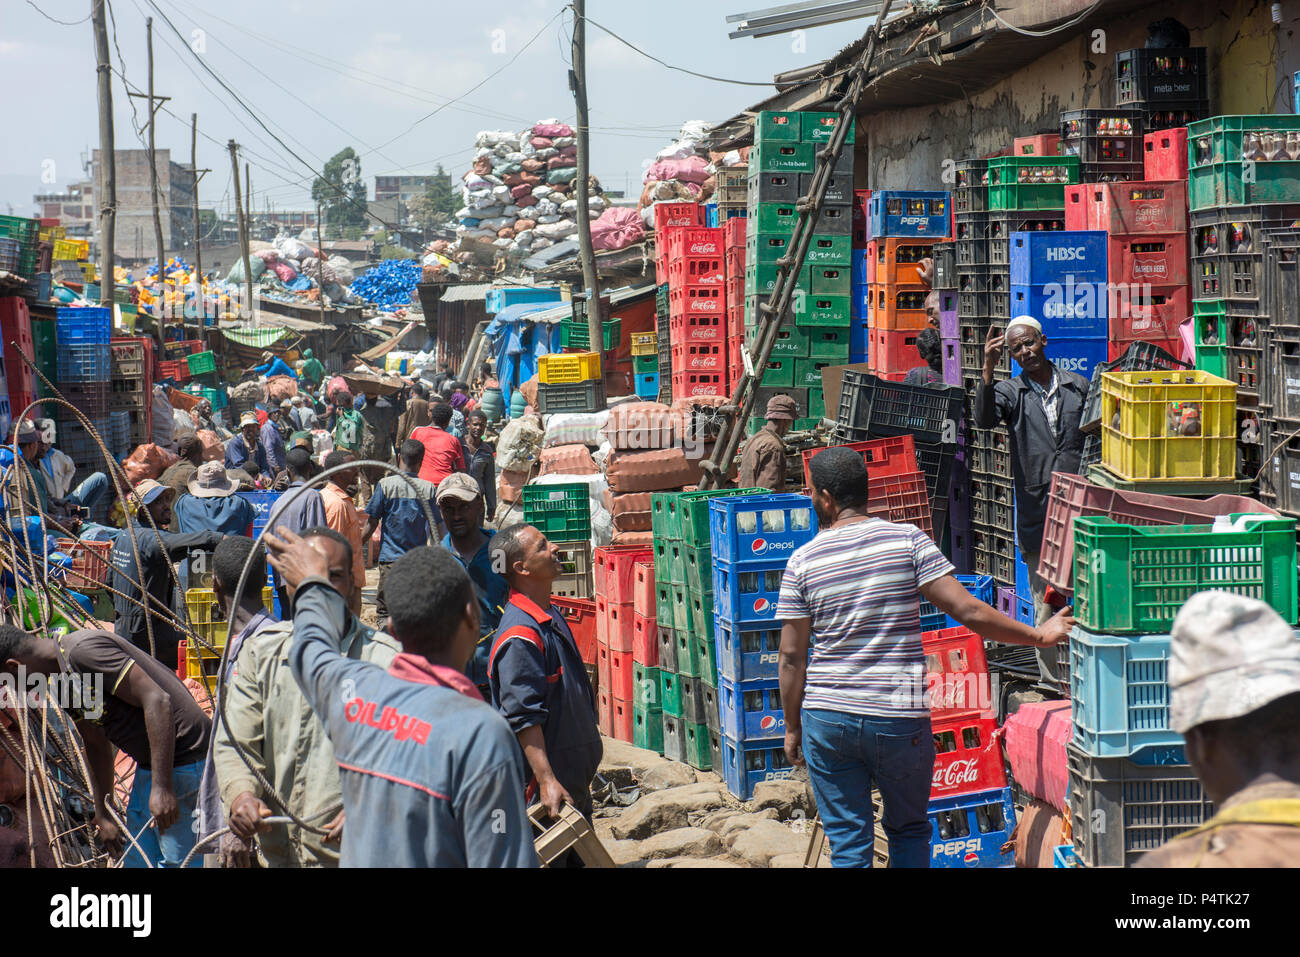 Scene in the recycling section of Addis Ababa's Mercato. Stock Photo